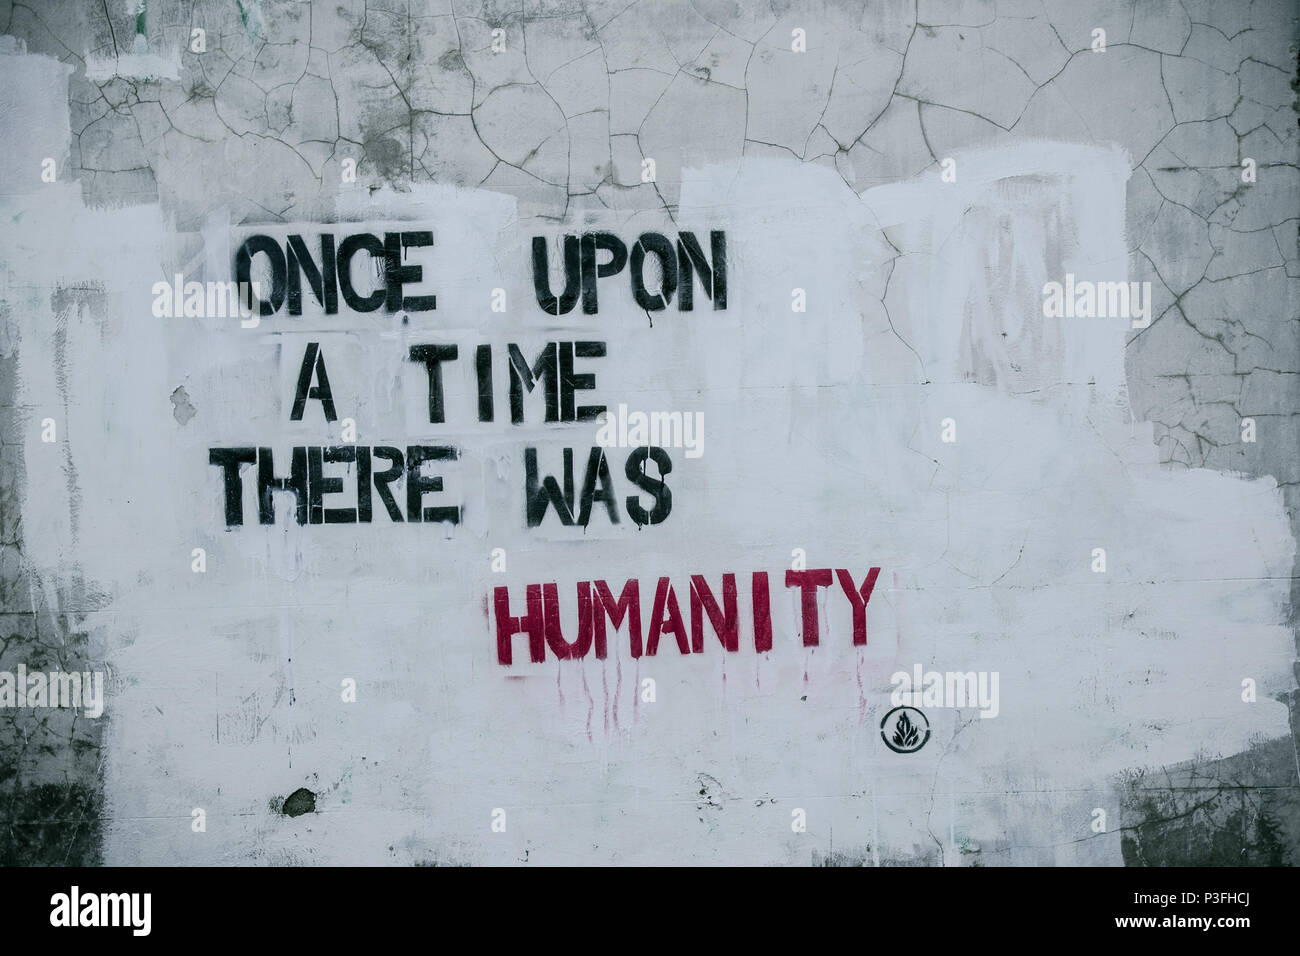 Message on the wall. Once upon a time there was humanity. Stock Photo